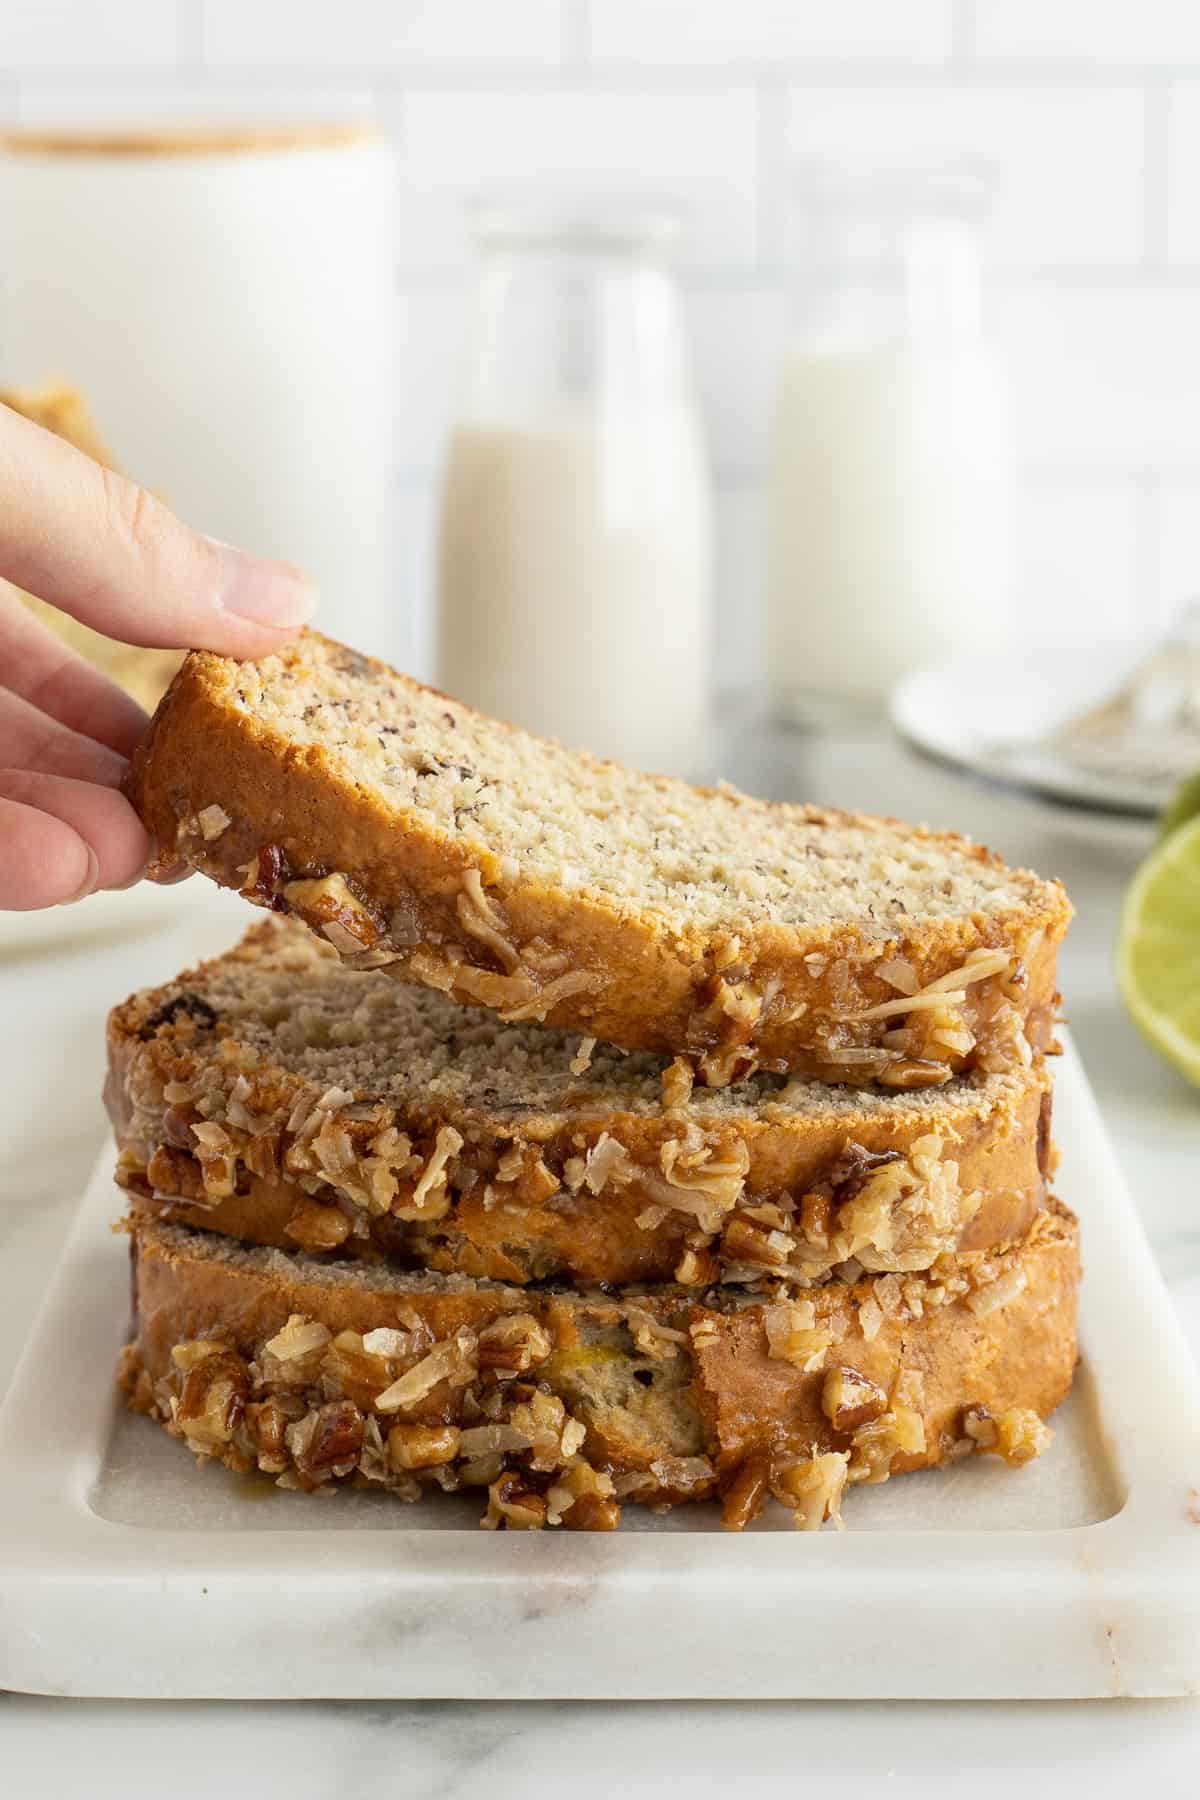 A hand lifting a slice of Jamaican Banana Bread off of a stack of three slices.